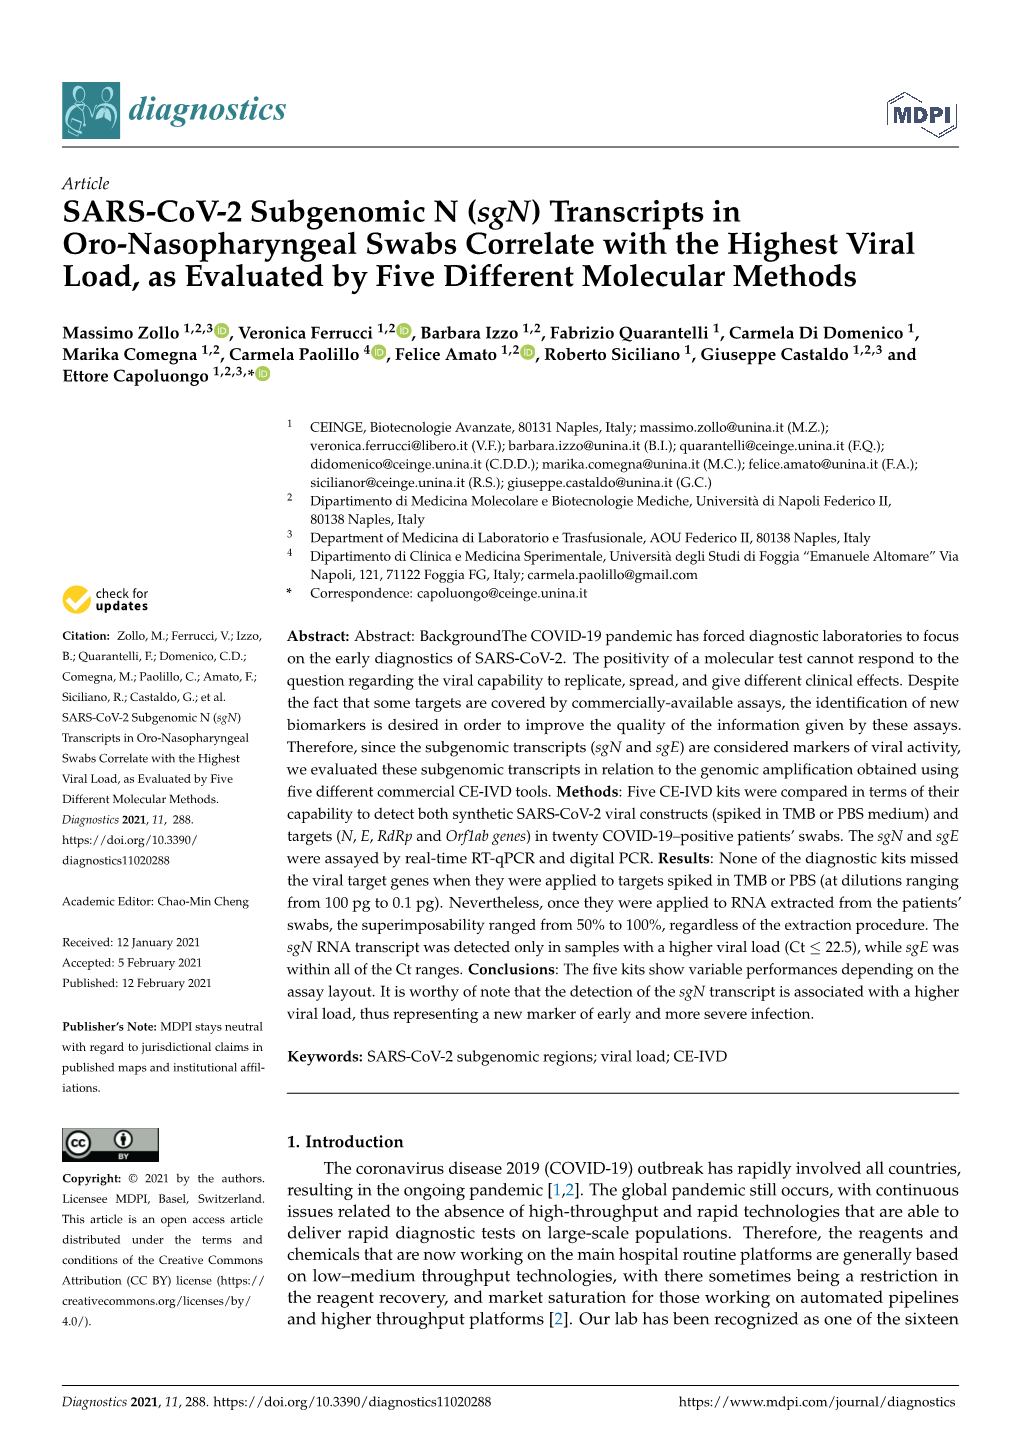 SARS-Cov-2 Subgenomic N (Sgn) Transcripts in Oro-Nasopharyngeal Swabs Correlate with the Highest Viral Load, As Evaluated by Five Different Molecular Methods